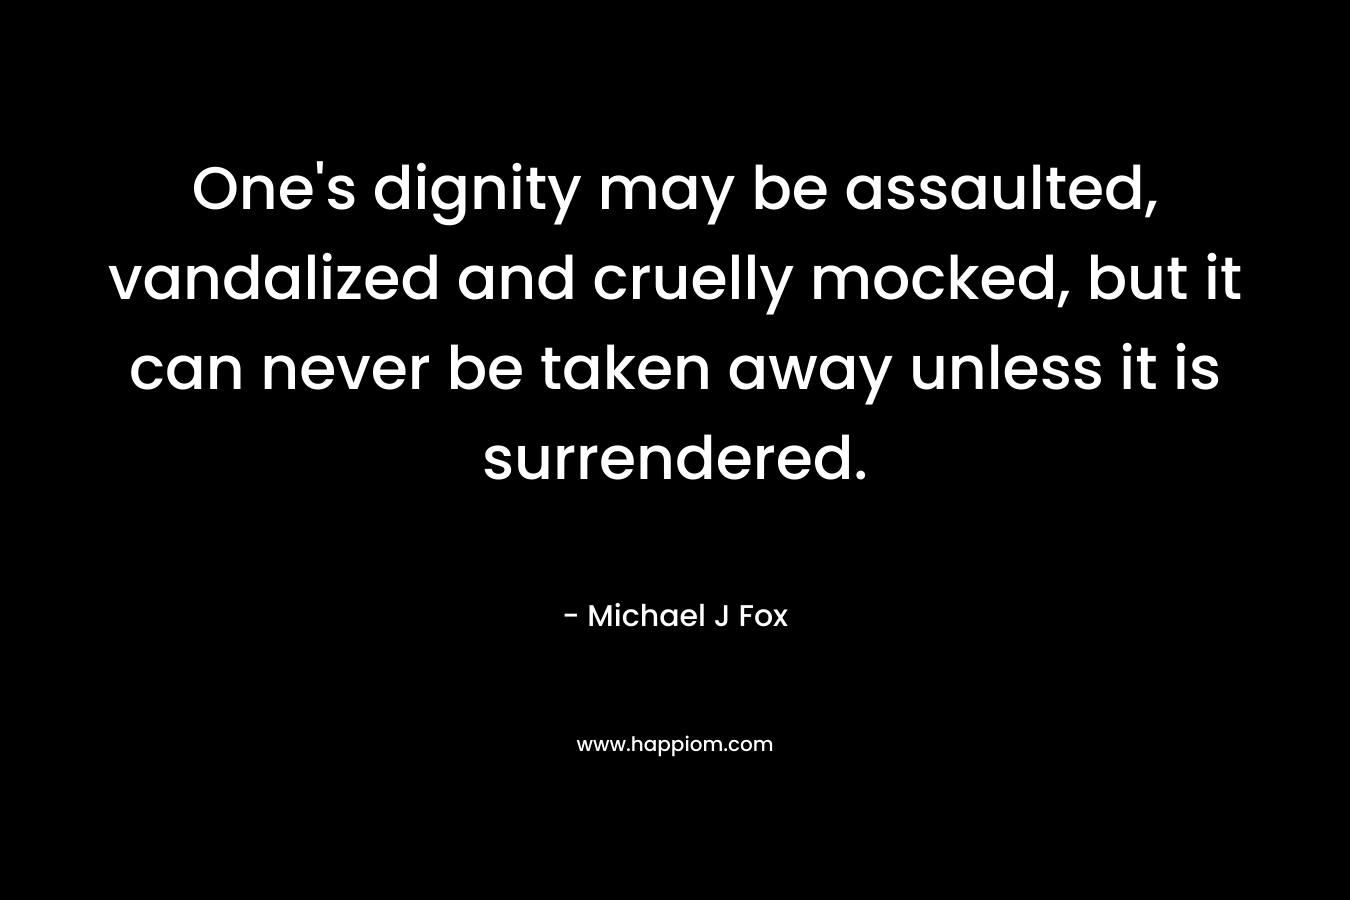 One's dignity may be assaulted, vandalized and cruelly mocked, but it can never be taken away unless it is surrendered.